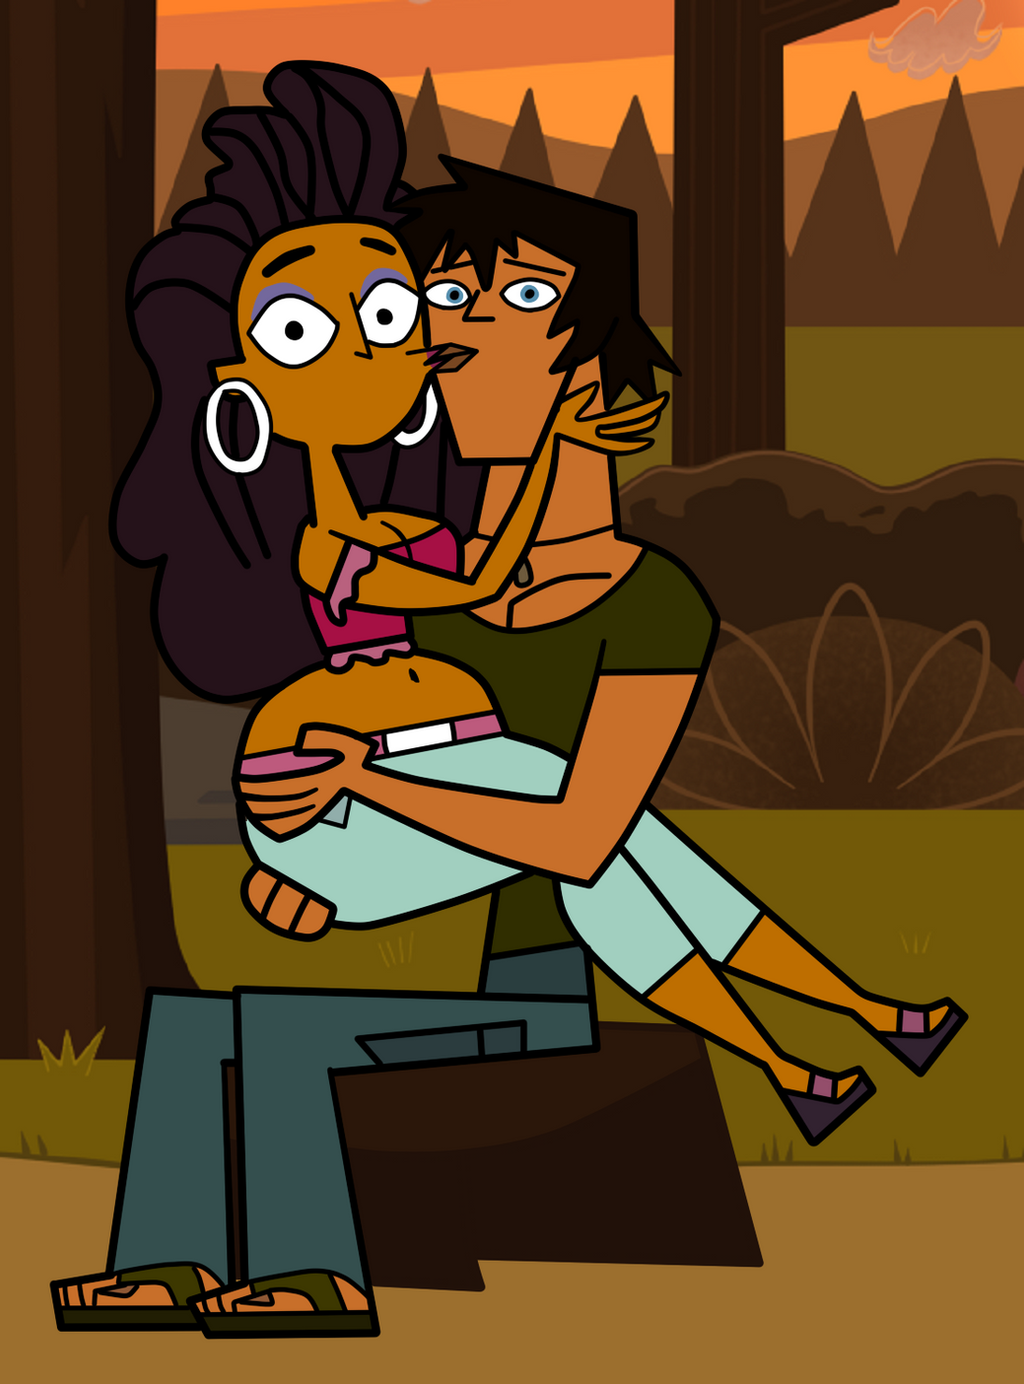 Total Drama Justin Kissing Anne Maria by jcpag2010 on DeviantArt